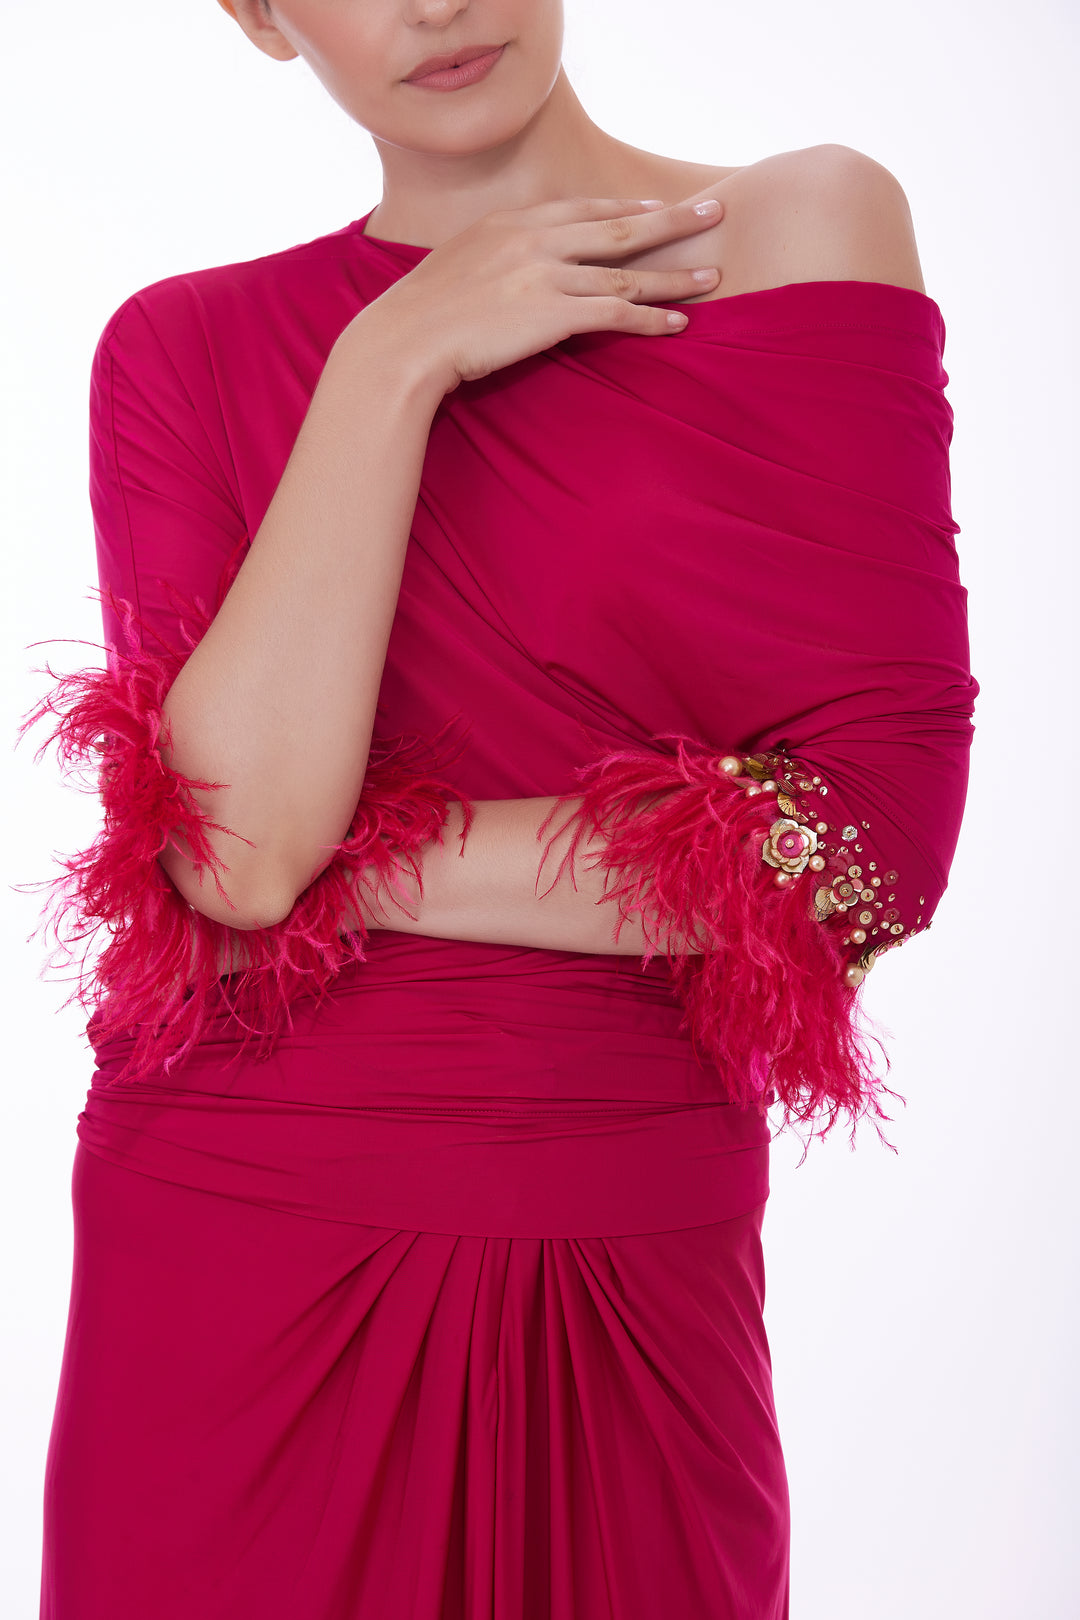 Draped Ruby skirt and top with fringed feathers